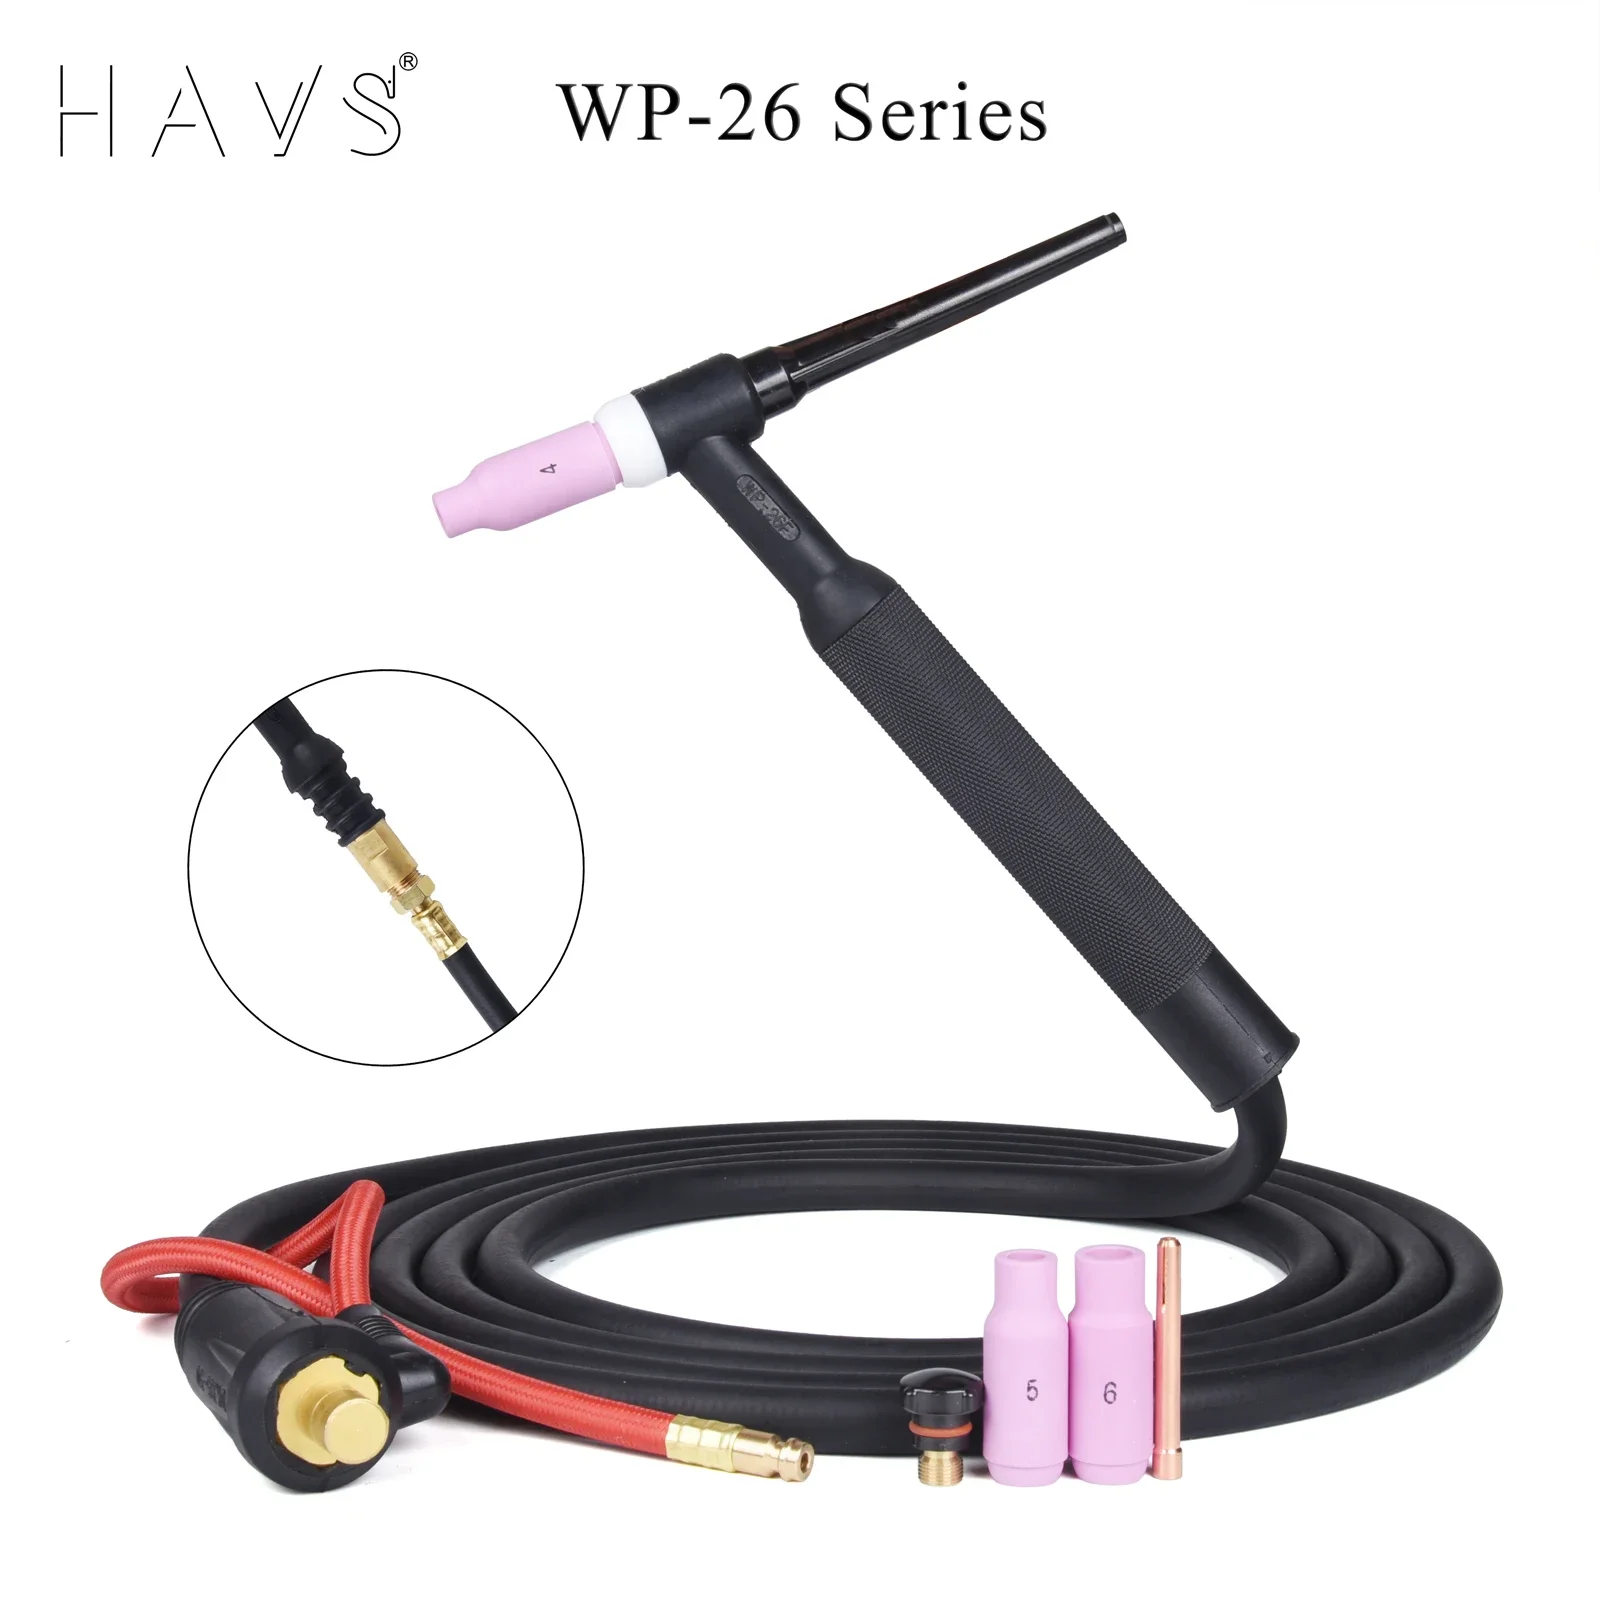 4m-wp26-quick-connect-tig-welding-torch-gas-electric-integrated-rubber-hose-cable-wires-35-50-euro-connector-1312ft